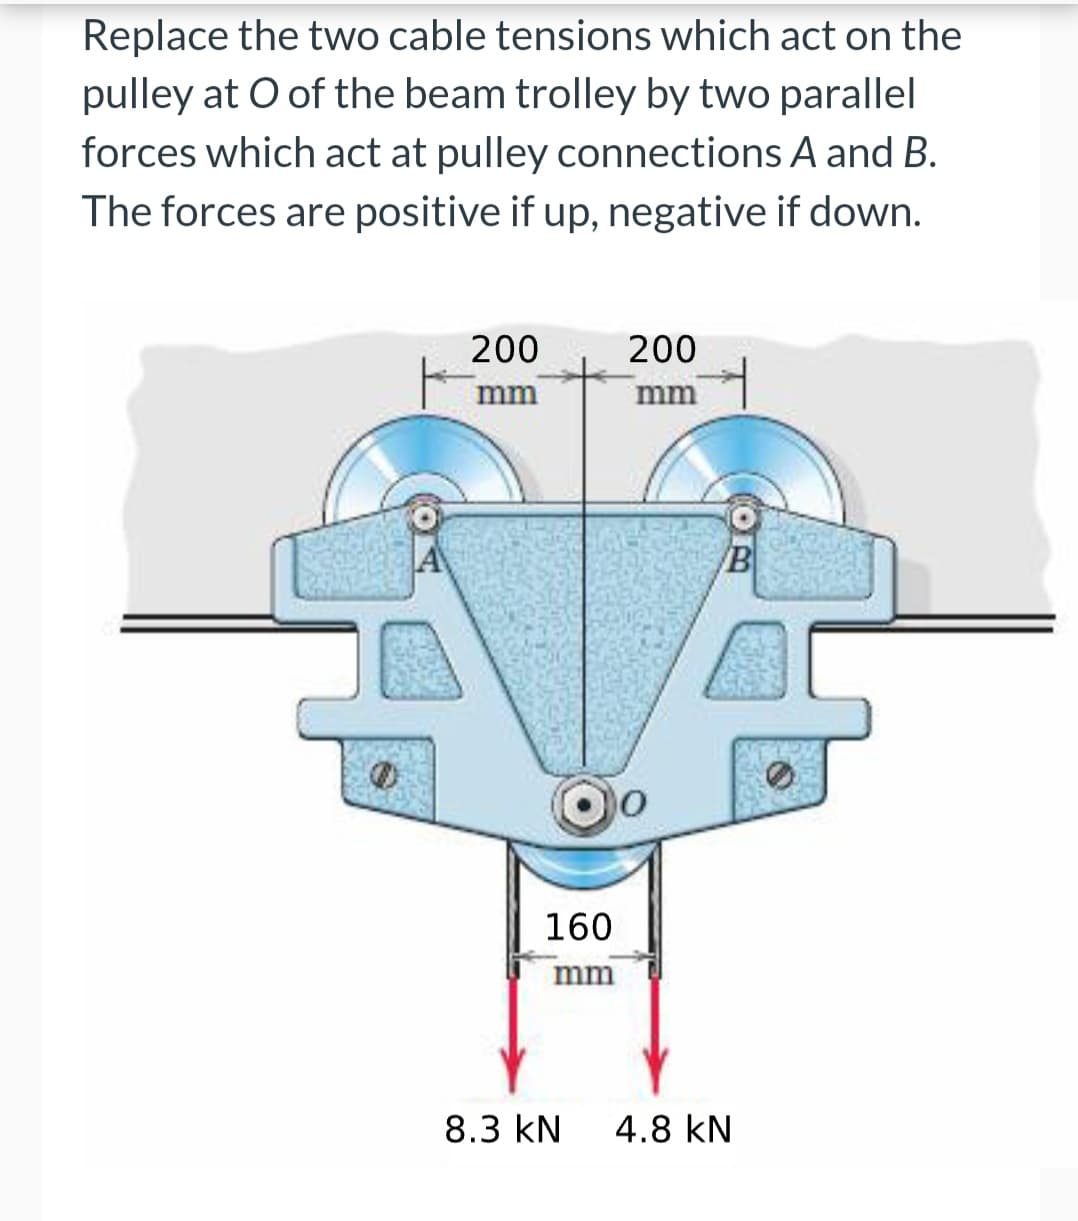 Replace the two cable tensions which act on the
pulley at O of the beam trolley by two parallel
forces which act at pulley connections A and B.
The forces are positive if up, negative if down.
200
mm
160
mm
8.3 KN
200
mm
BO
/B
4.8 KN